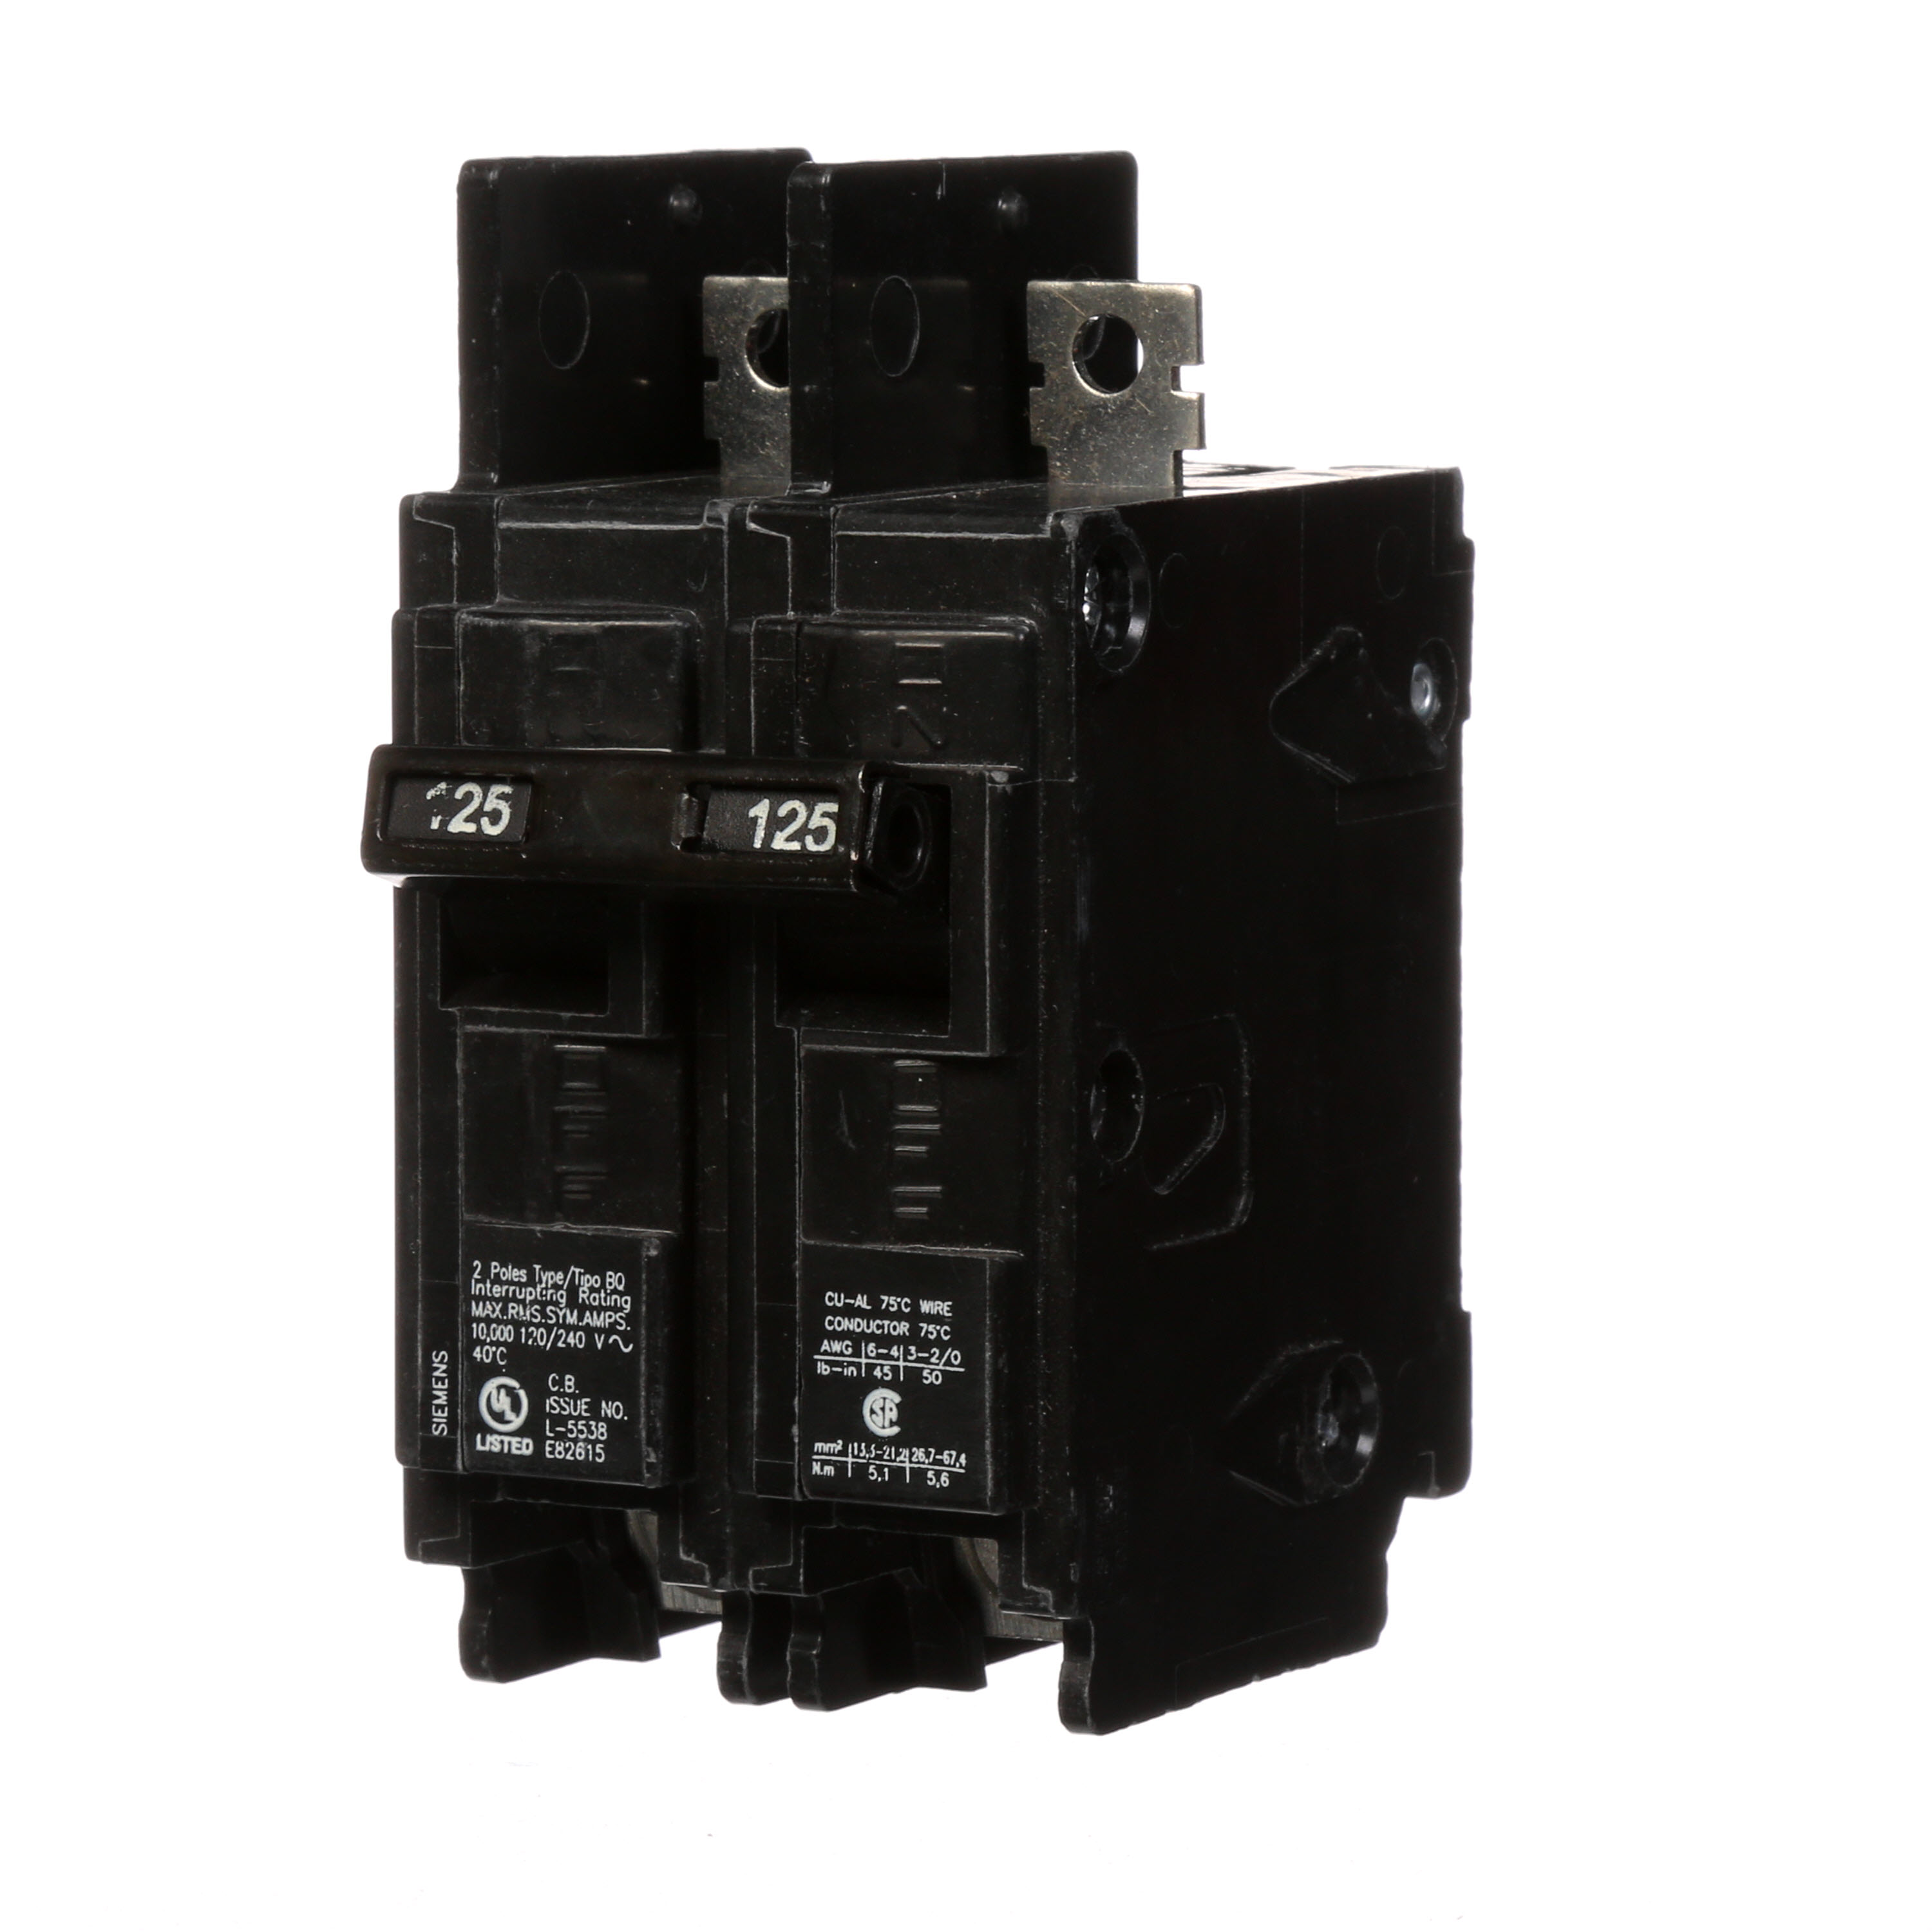 Siemens Low Voltage Molded Case Circuit Breakers General Purpose MCCBs - Type BQ, 2-Pole, 120/240VAC are Circuit Protection Molded Case Circuit Breakers. 2-Pole Common-Trip circuit breaker type BQ. Rated 120/240V (125A) (AIR 10 kA). Special features Load side lugs are included.